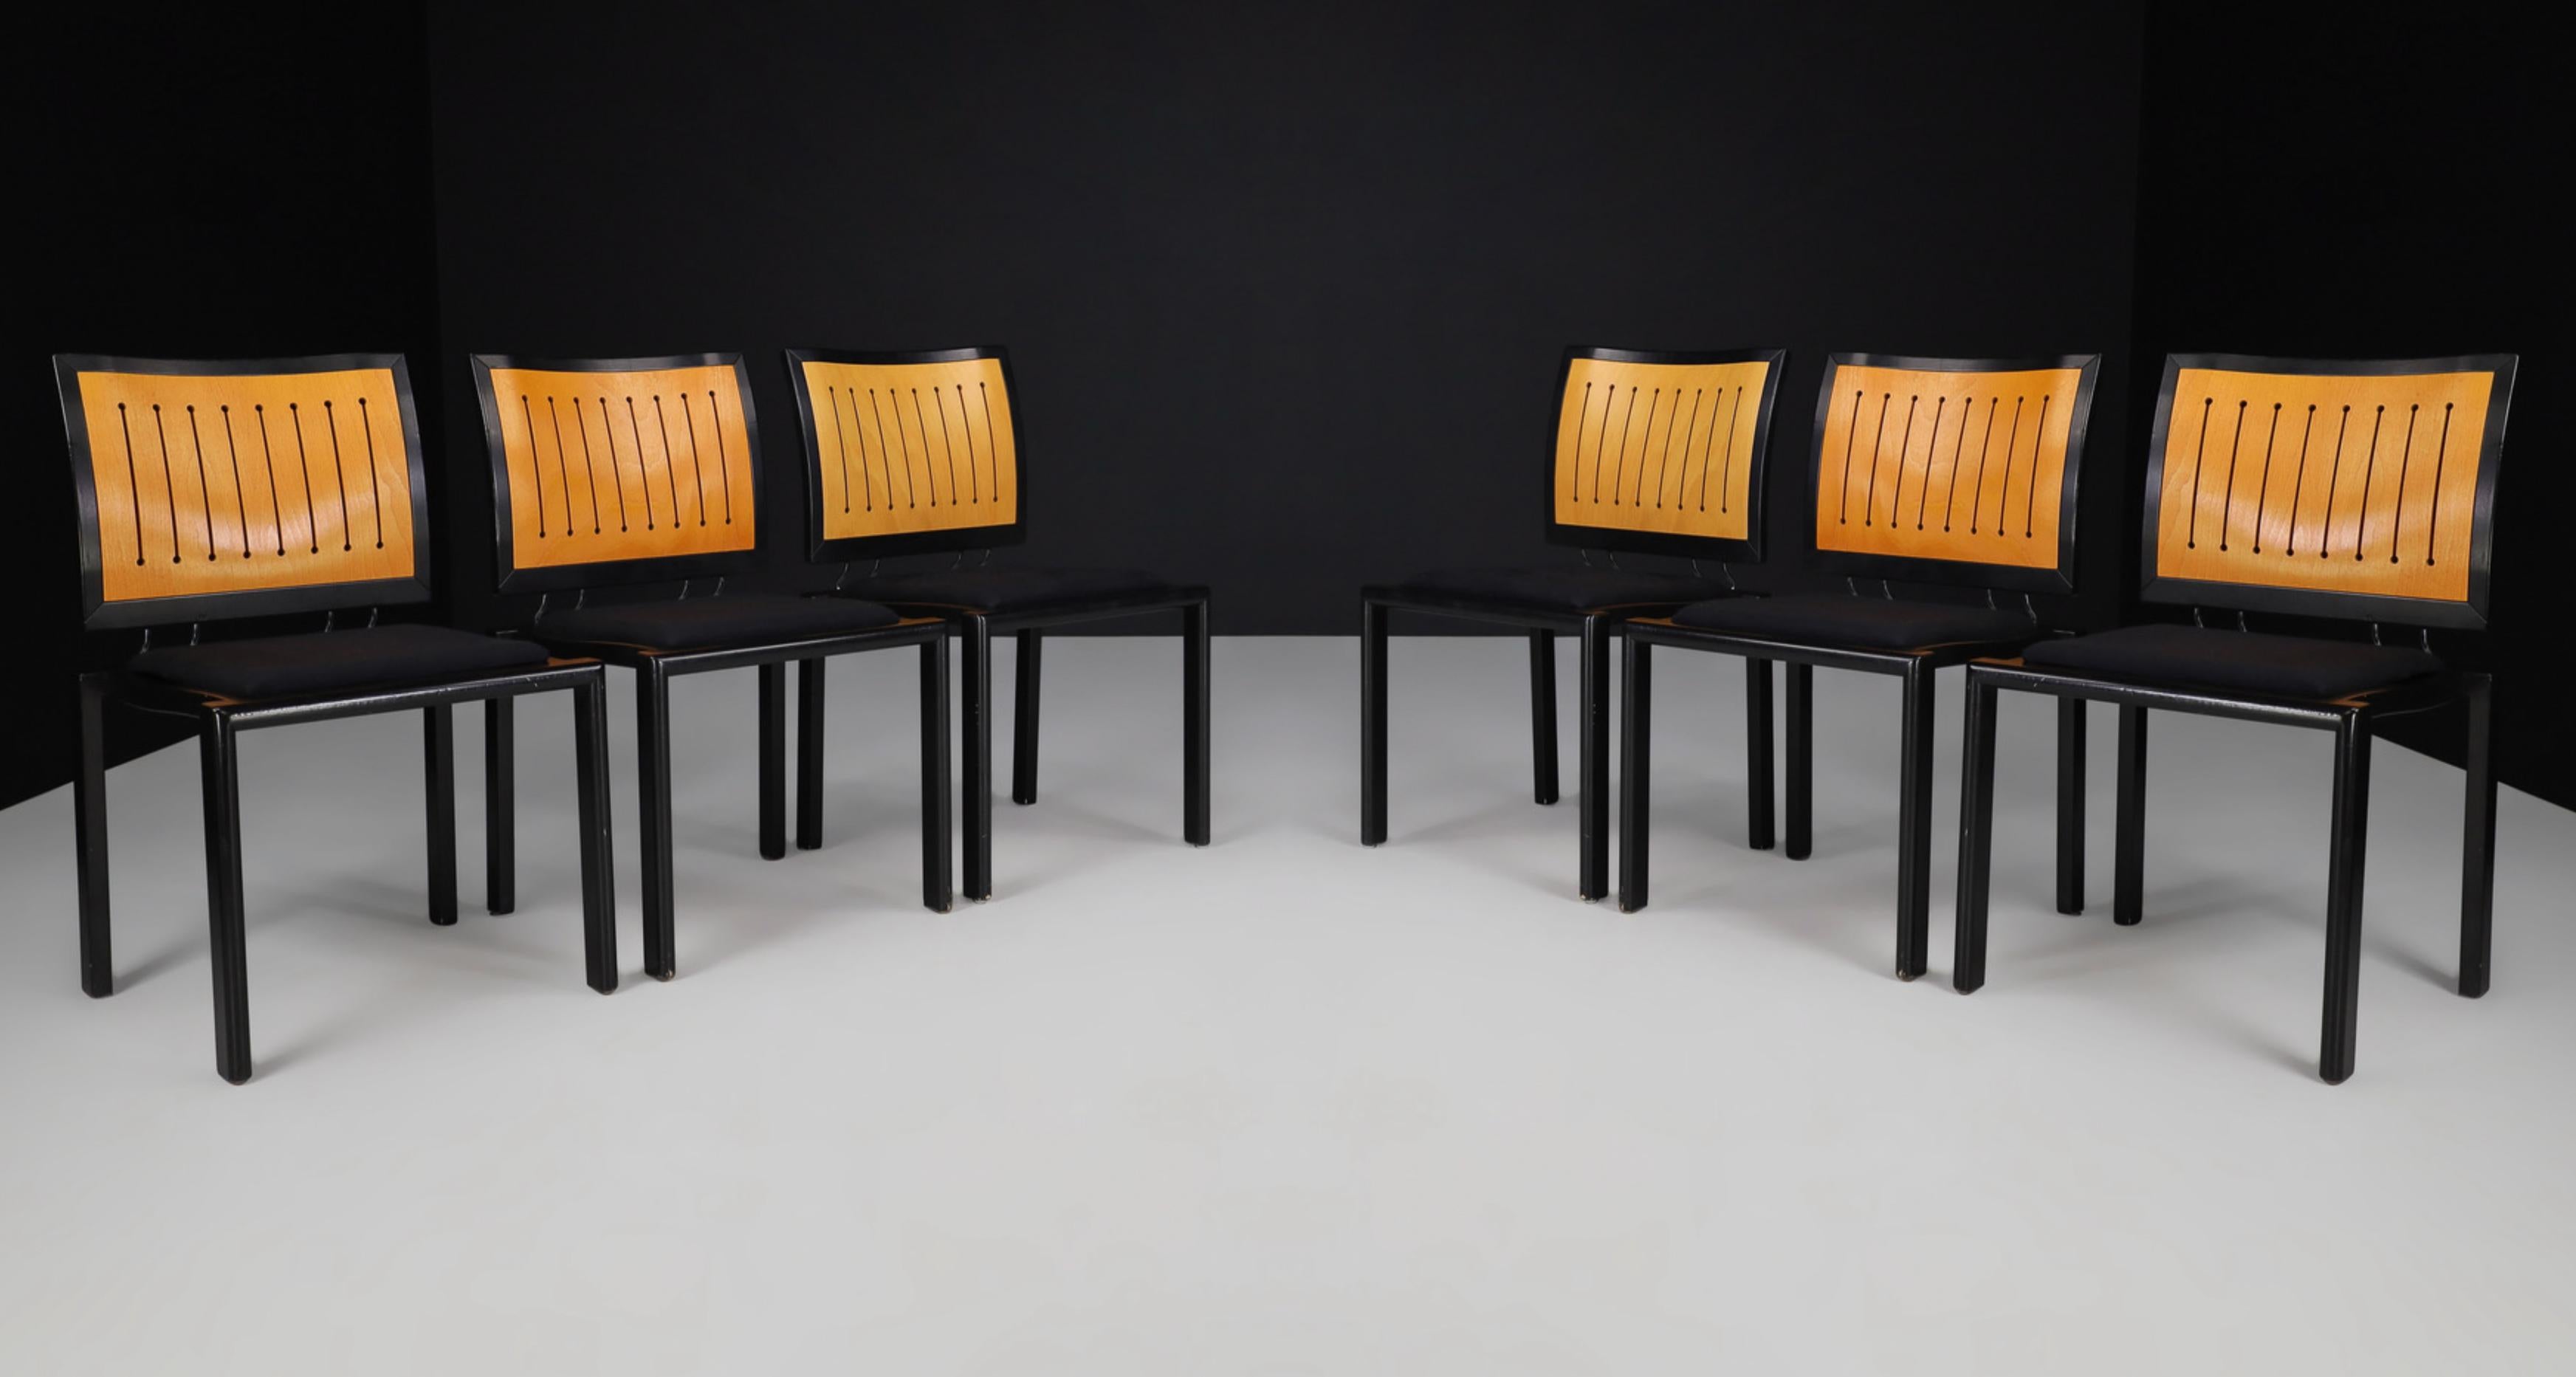 Quadro chairs by Bruno Rey & Charles Polin For Dietiker, Switzerland 1989.

Designed in 1980s by Swiss most renowned designer Bruno Rey in collaborator with Charles Polin, these classic chairs has its timeless characteristic from its square lines.